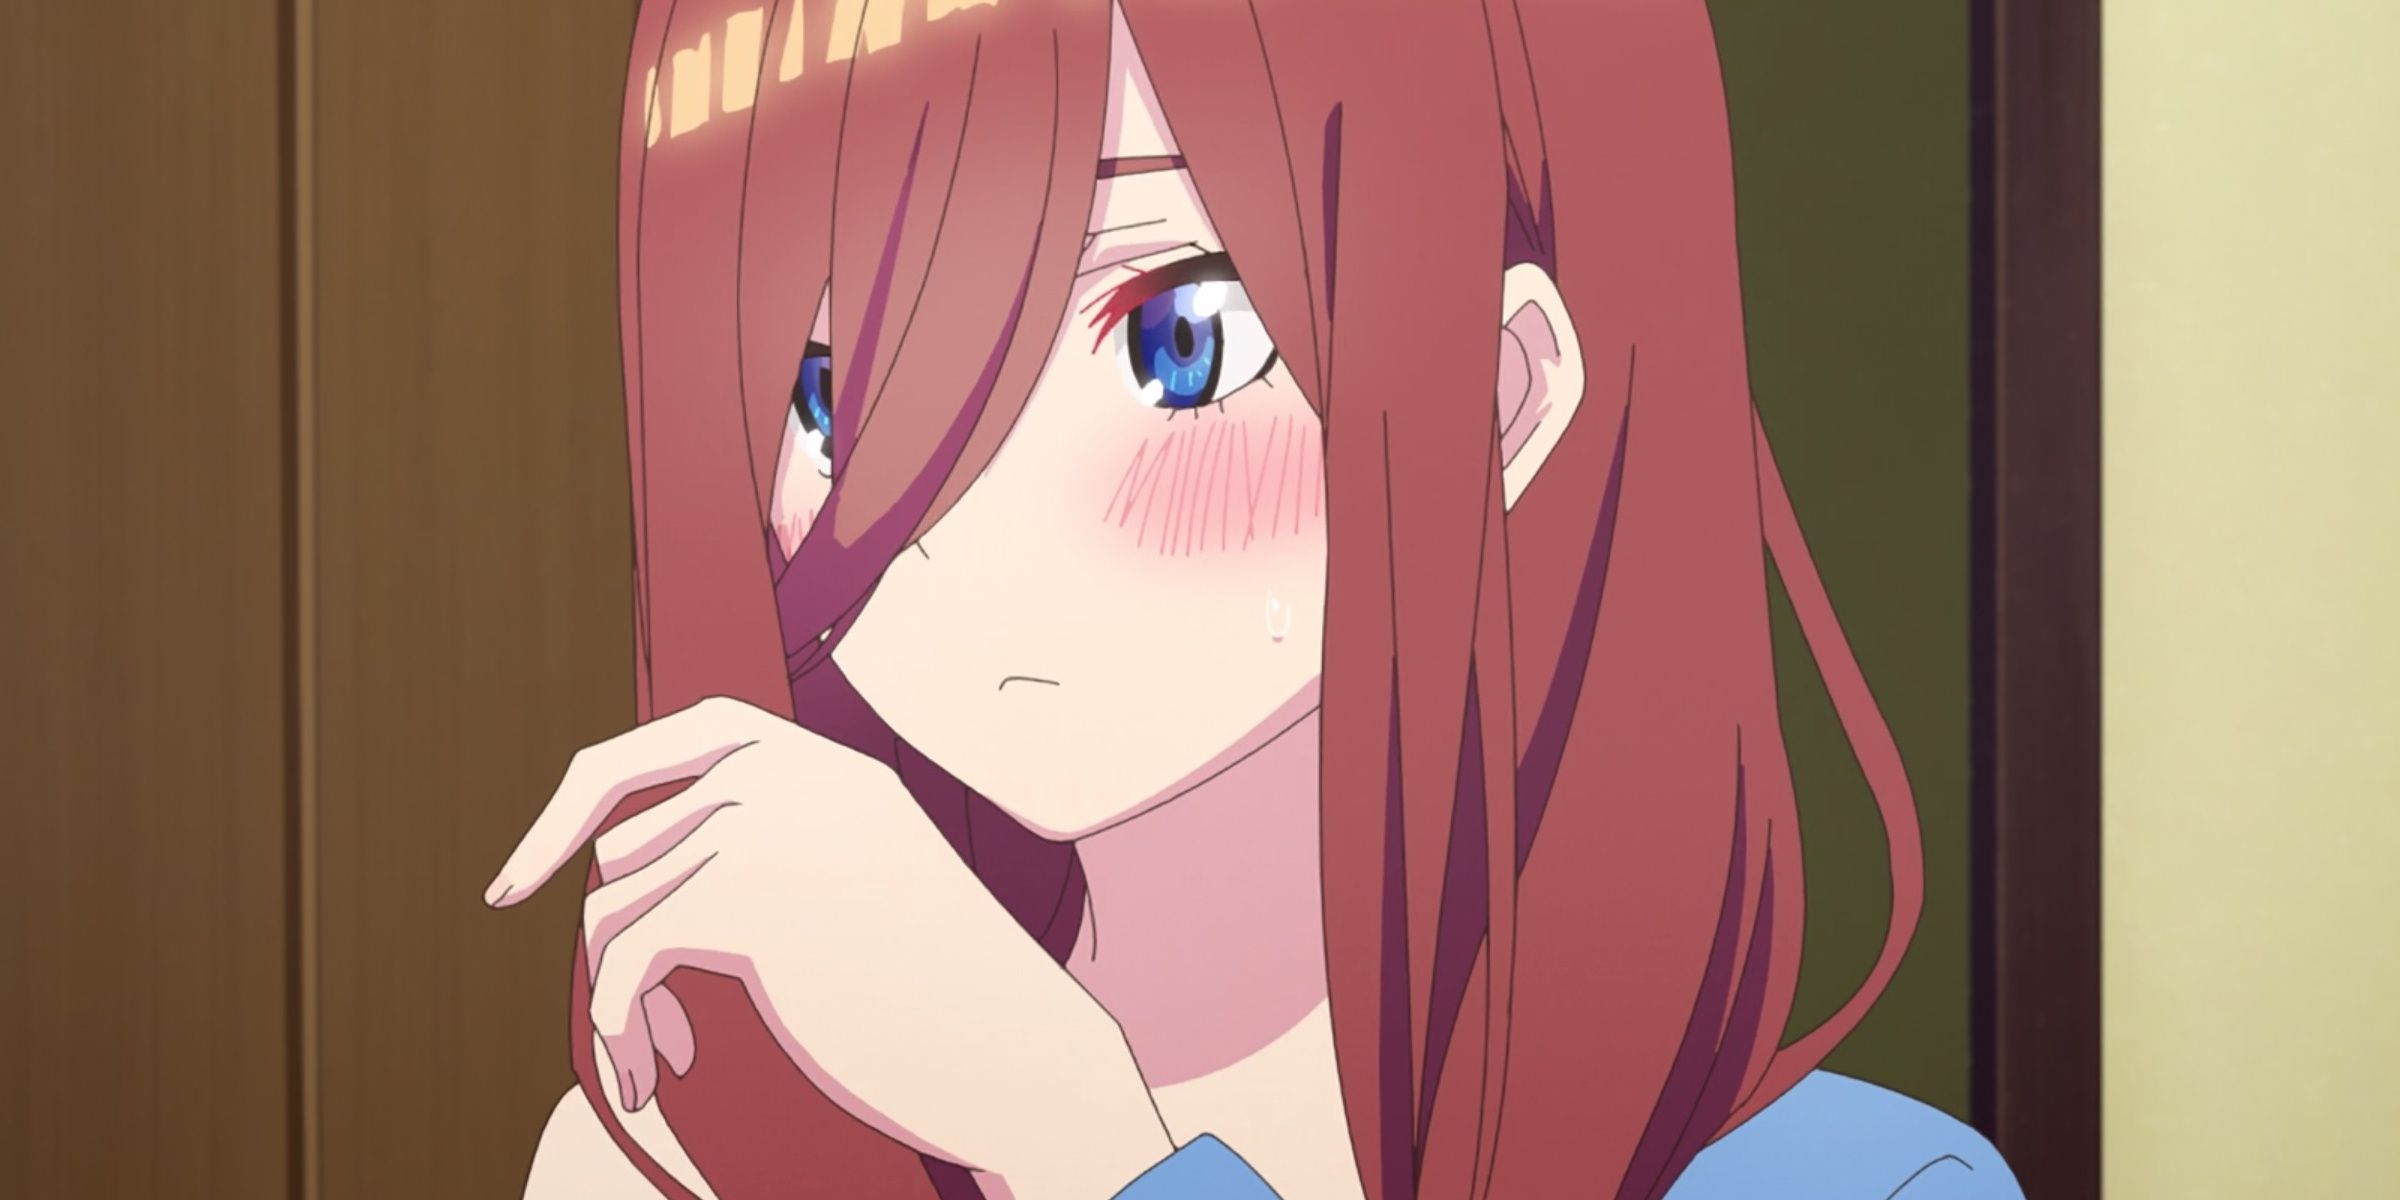 Miku Nanako from The Quintessential Quintuplets looks away and blushes.